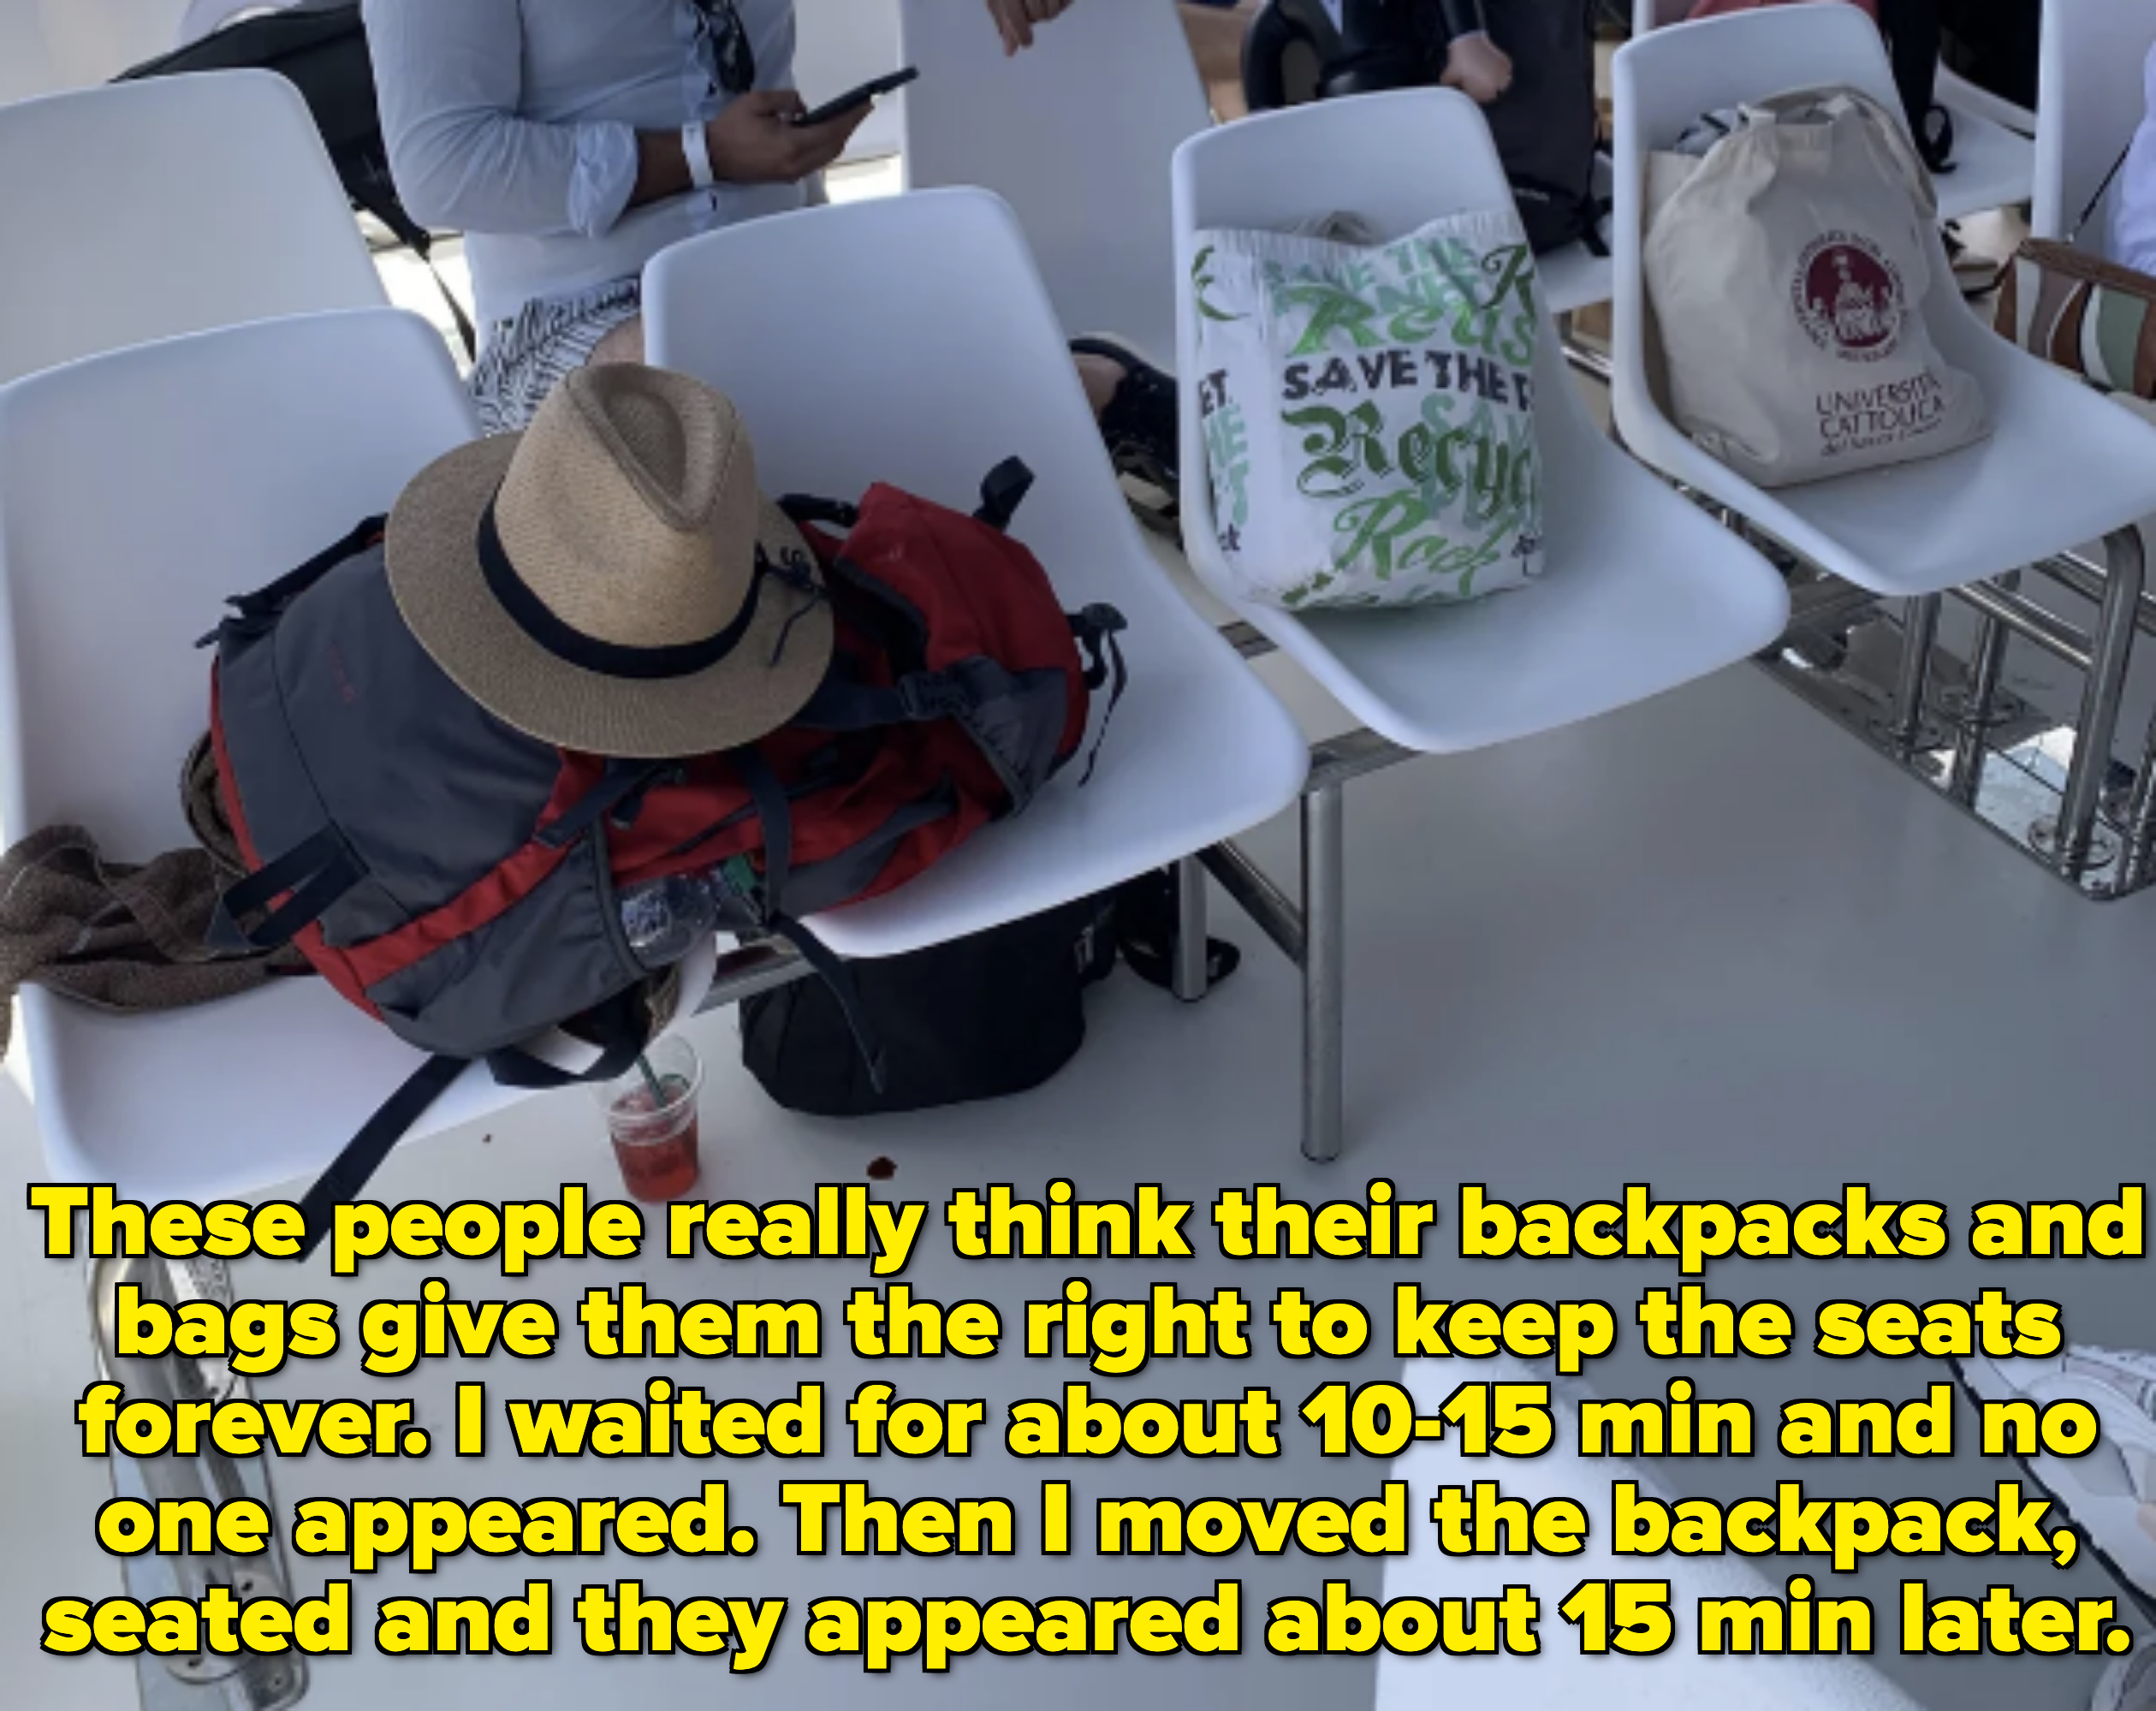 Several personal items, including a backpack, hat, and tote bags placed on white chairs in an outdoor setting. People are partially visible in the background